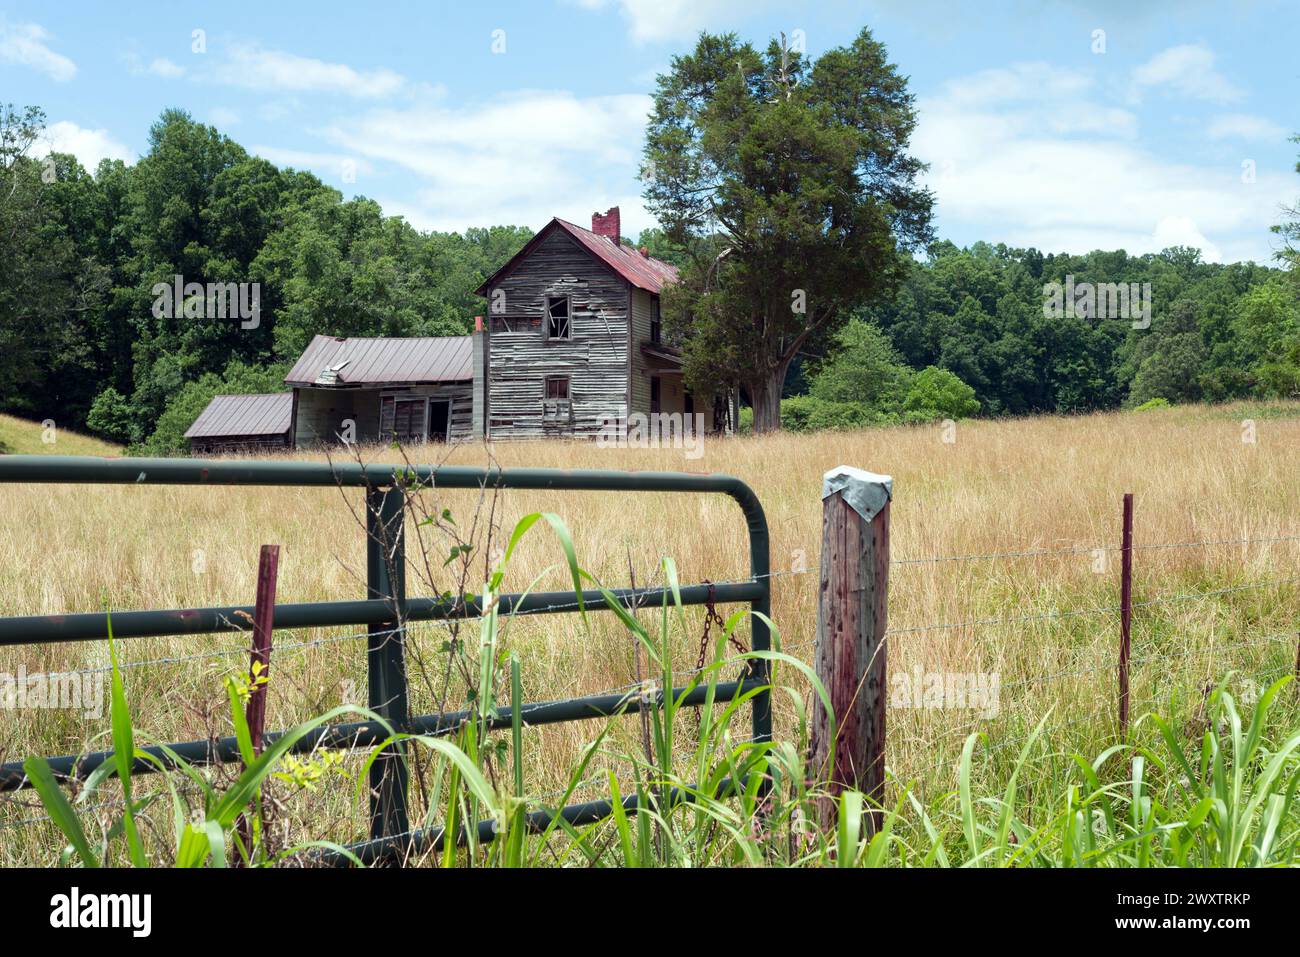 Old rustic wooden barn in a field with trees in the background.  Closed gate, fence and post in the foreground.  Near Asheville, North Carolina. Stock Photo